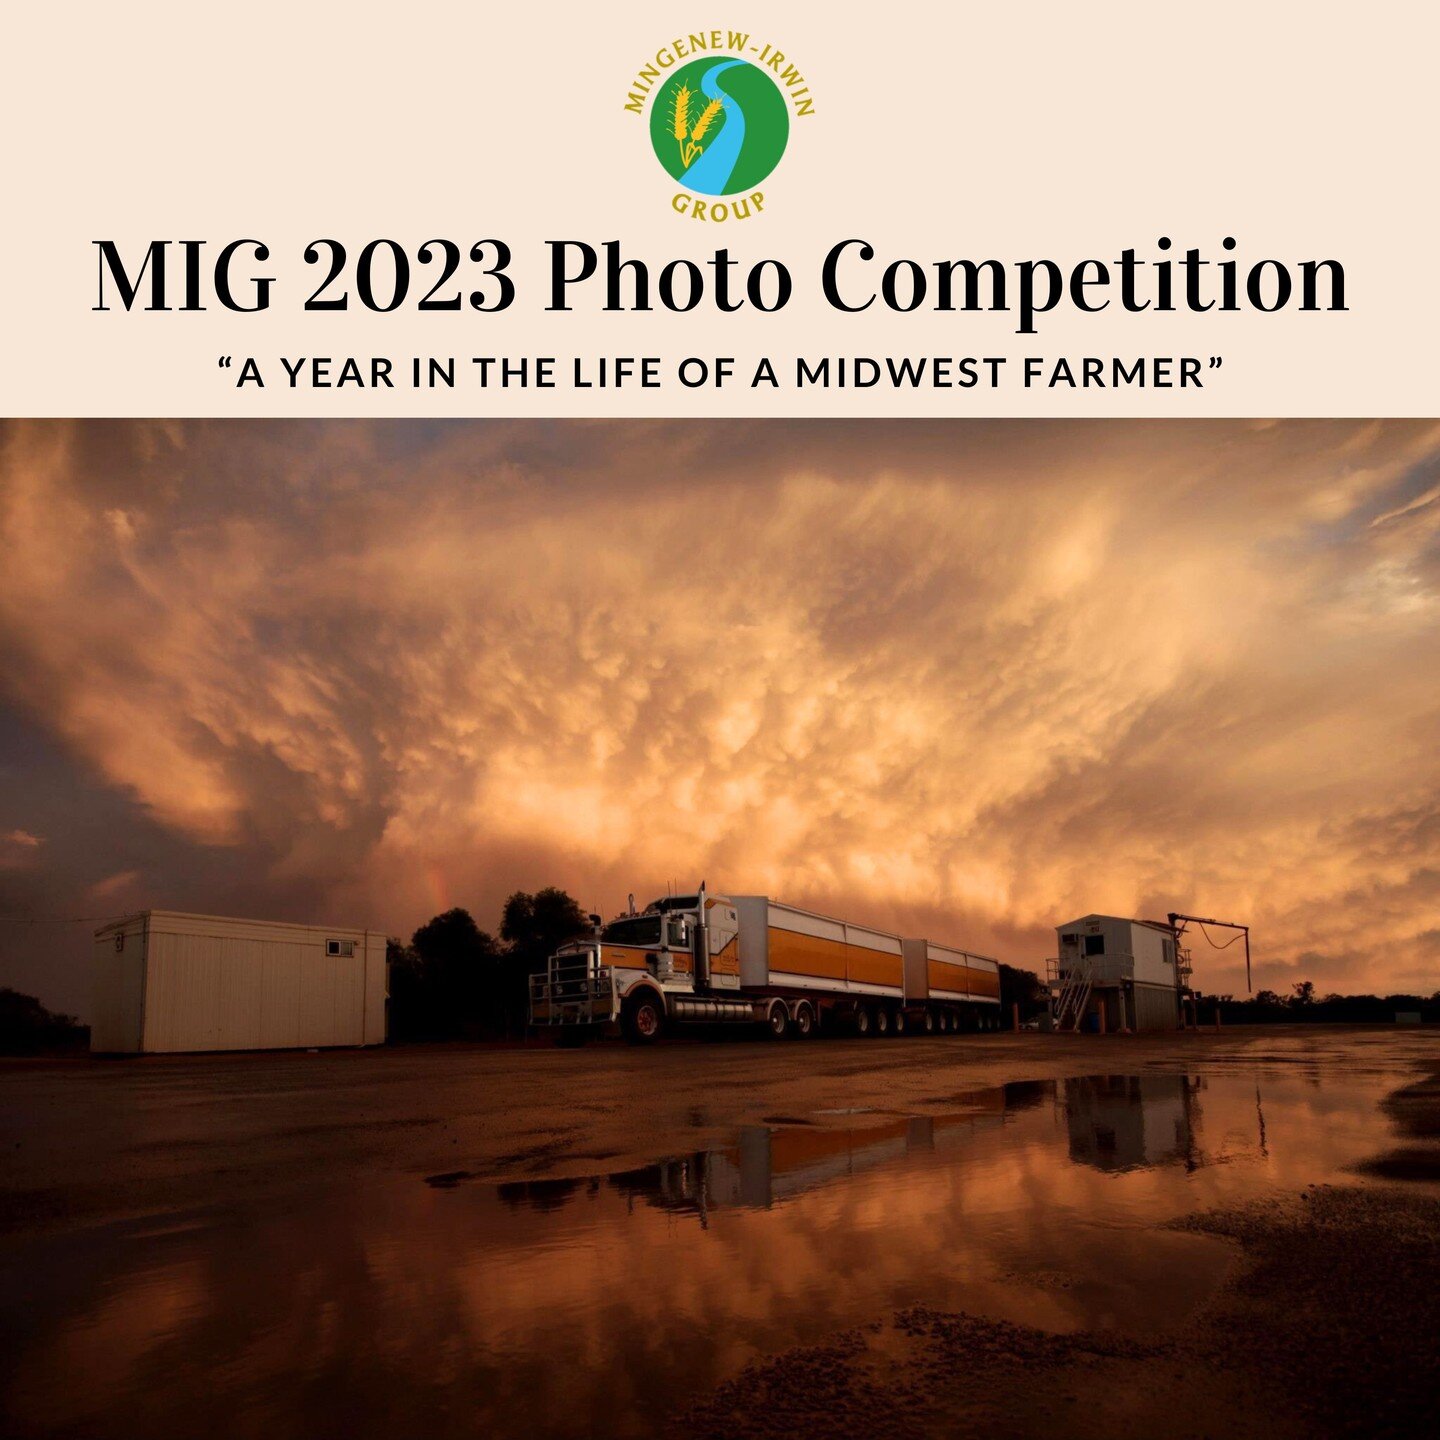 Don't forget to get your entries in for the 2023 photo competition! Please send your photos through to trials@mig.org.au by the 5th of December. The two winning photos will receive a spot on the front cover of the 2023 &quot;Trials Book&quot;.
**By e